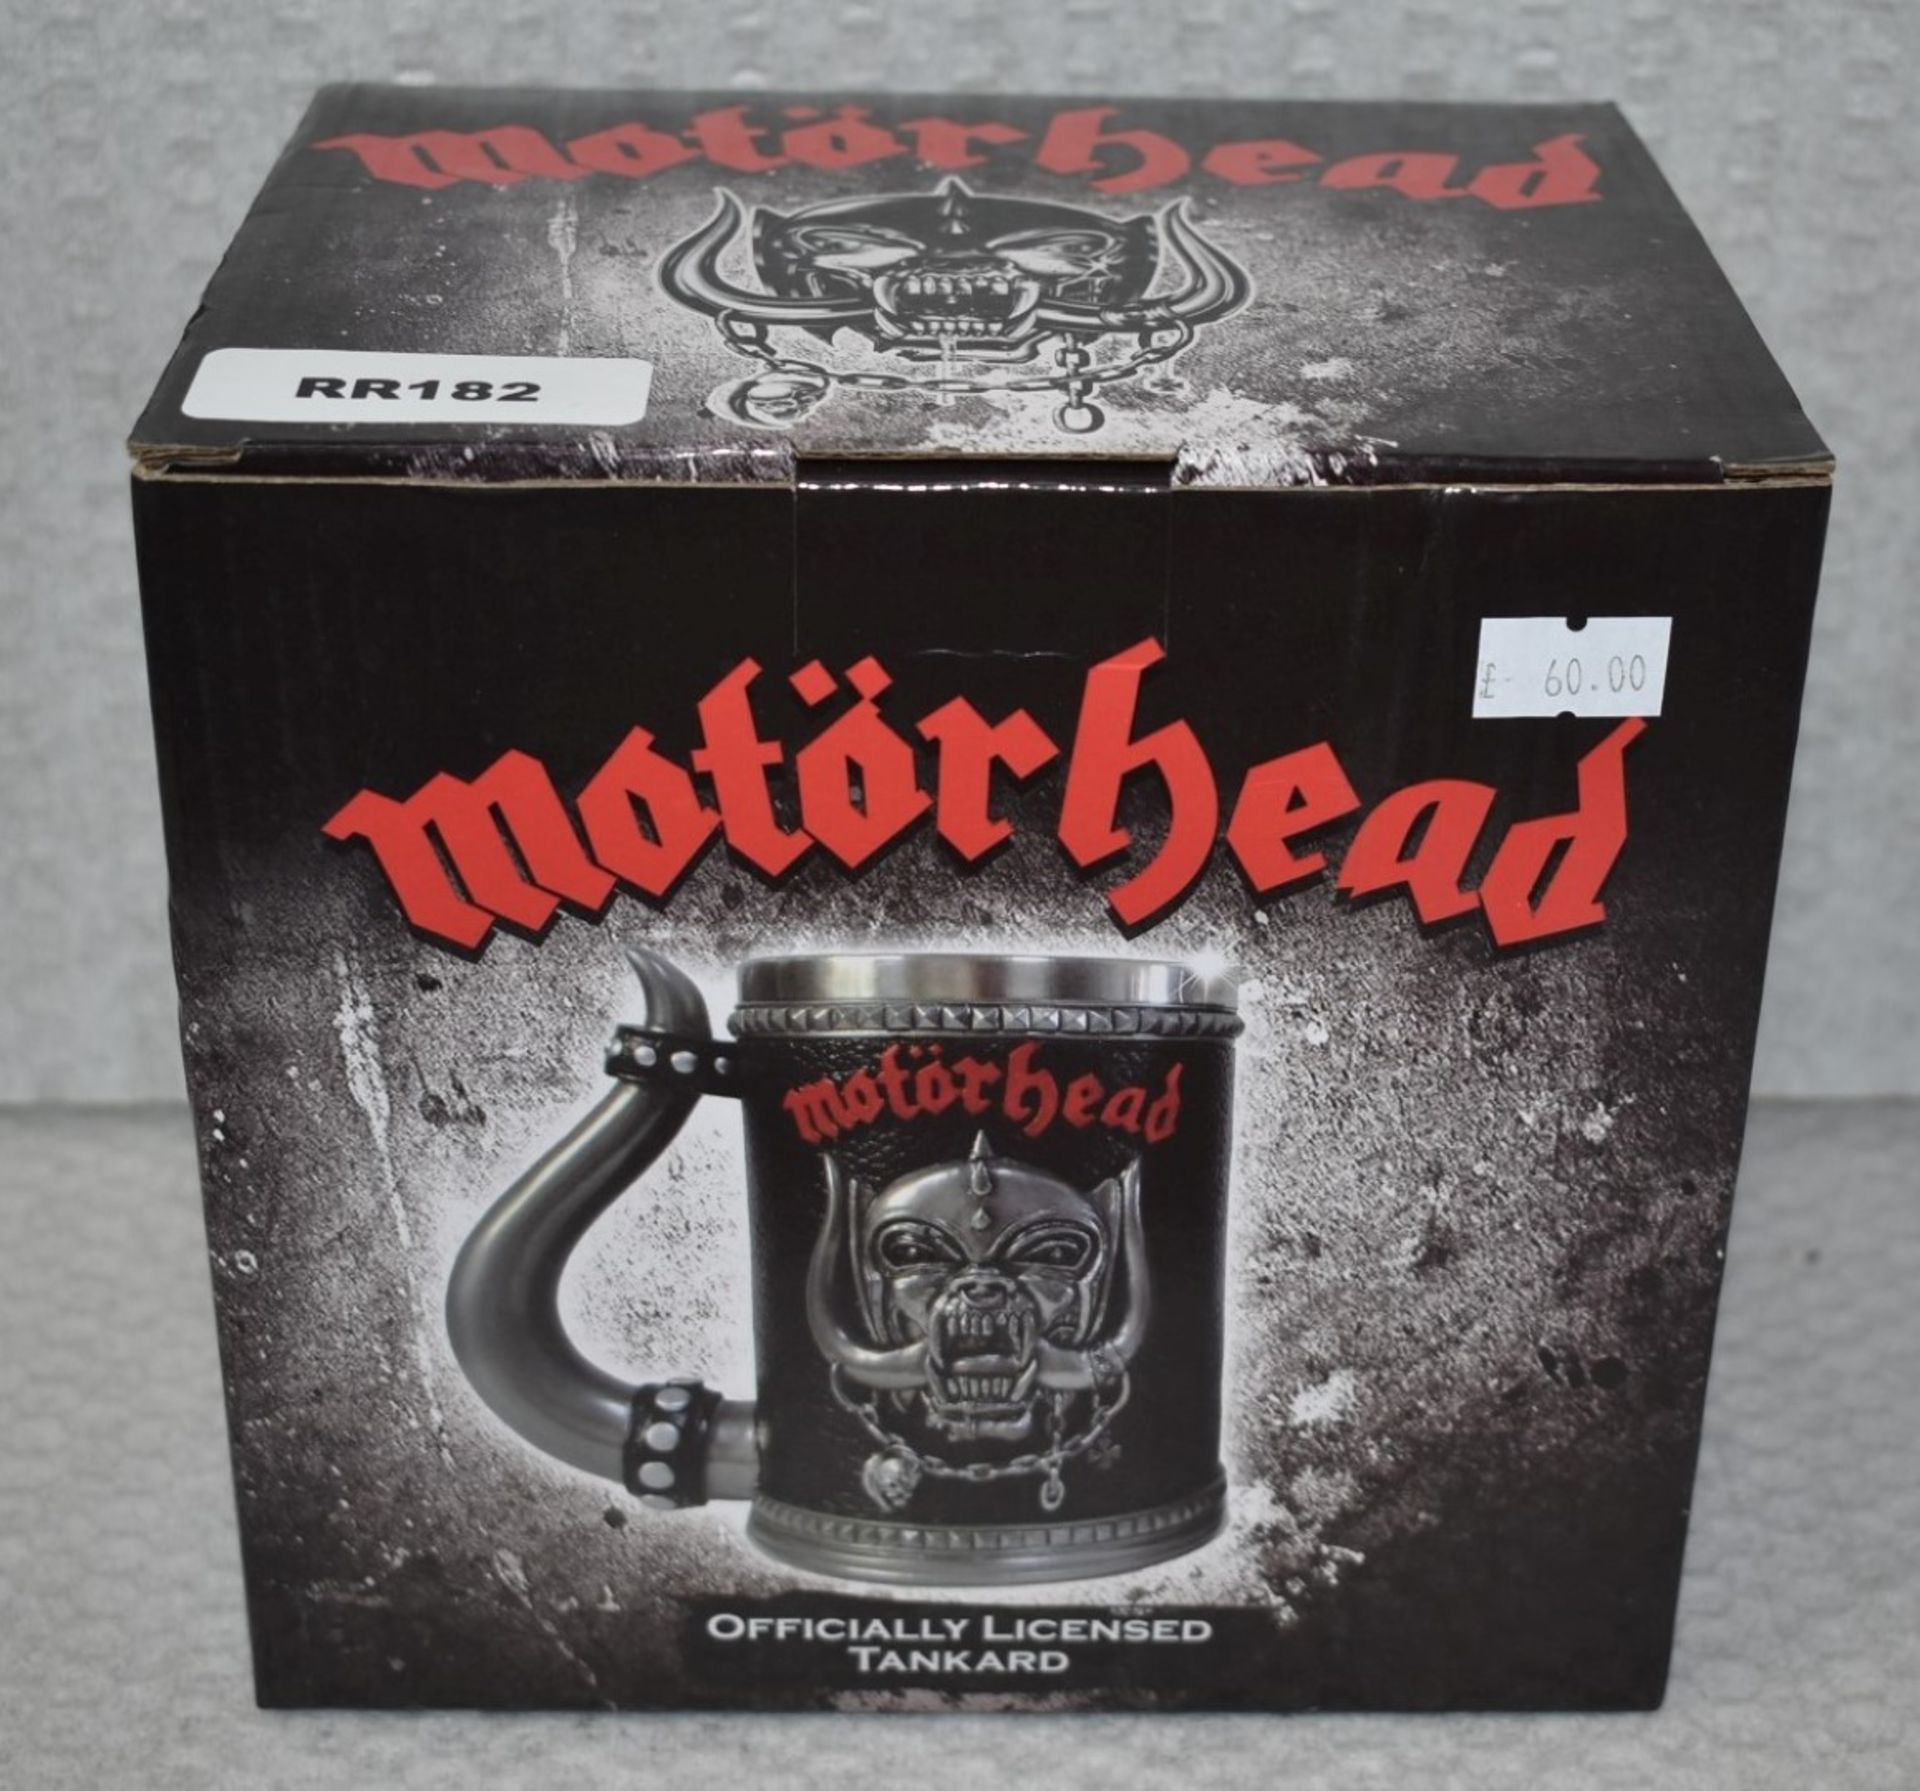 1 x Motorhead Drinks Tanker By Nemesis Now - Features Detailed Warpig Sculpture, Hand Painted - Image 4 of 8